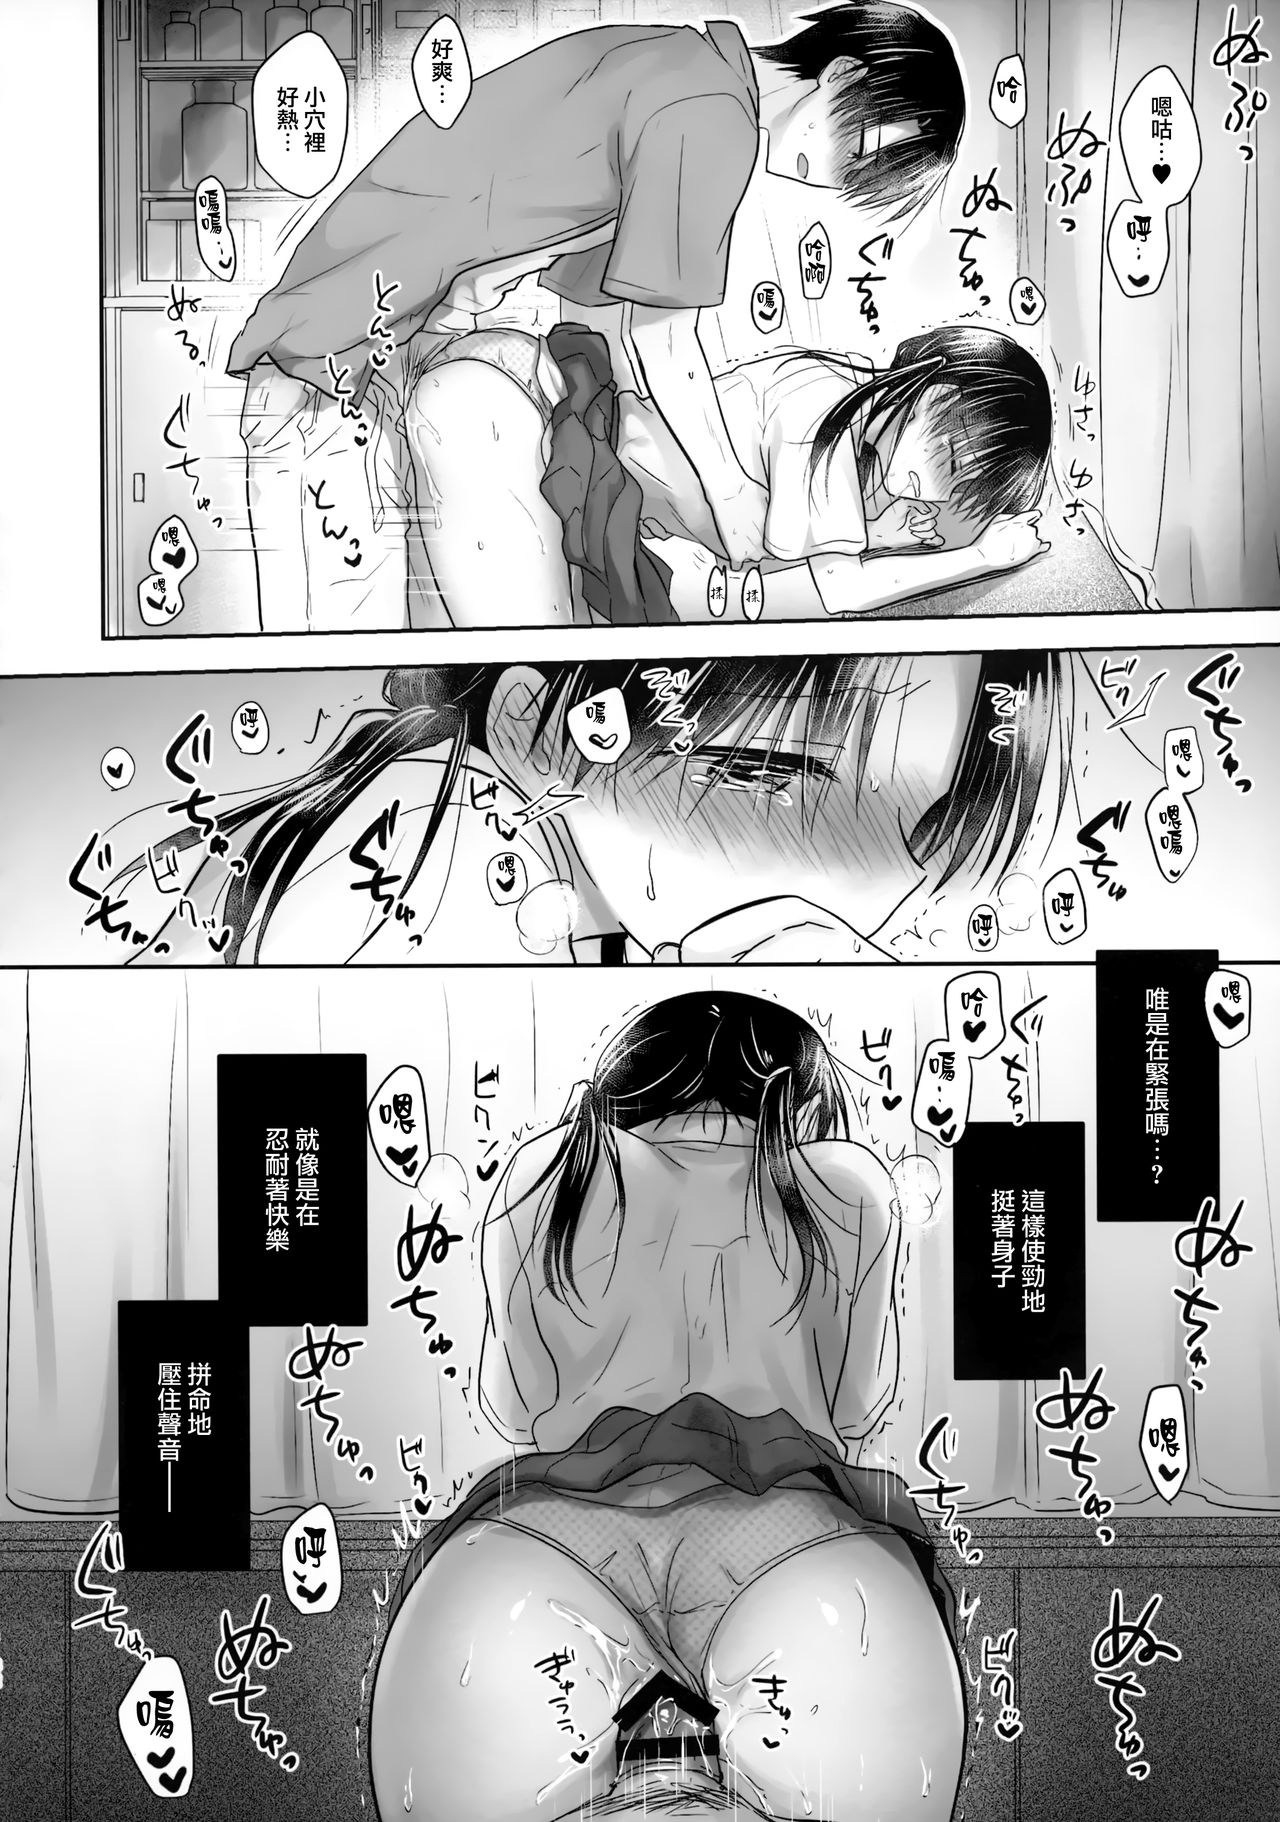 (C96) [Aquadrop (Mikami Mika)] Omoide Sex [Chinese] [山樱汉化] page 35 full